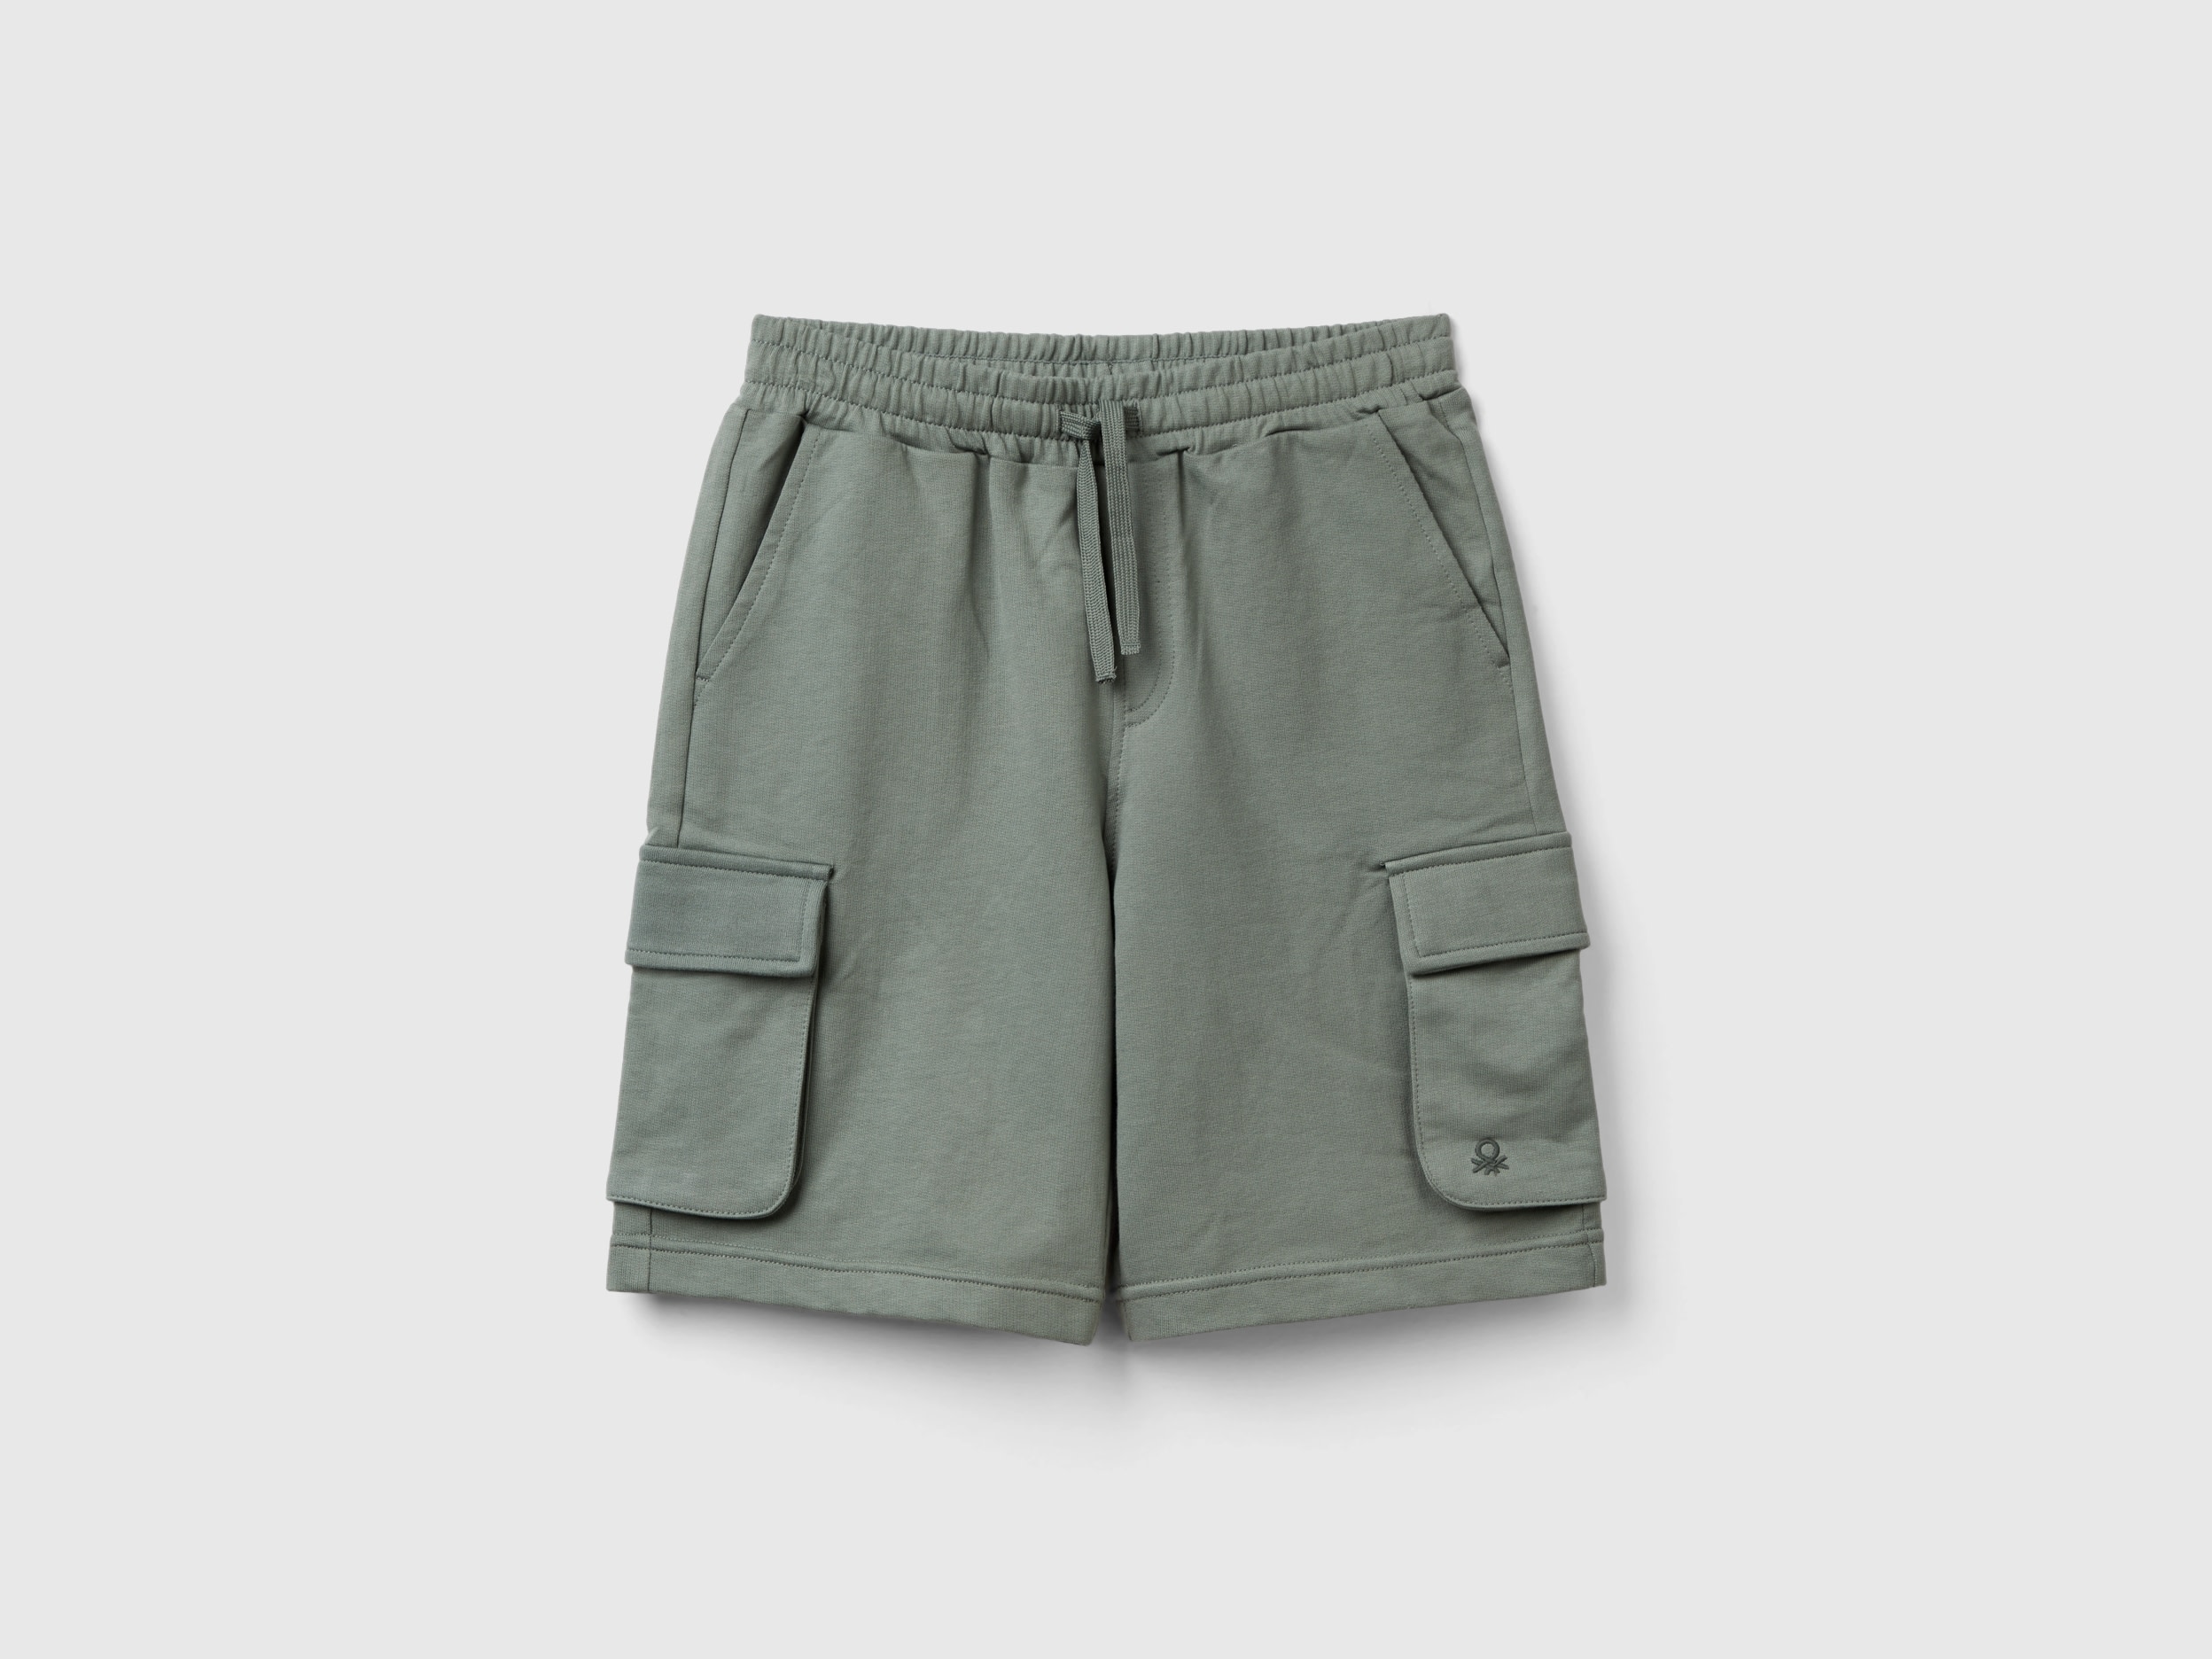 Image of Benetton, Cargo Shorts In Light Sweat Fabric, size L, Military Green, Kids